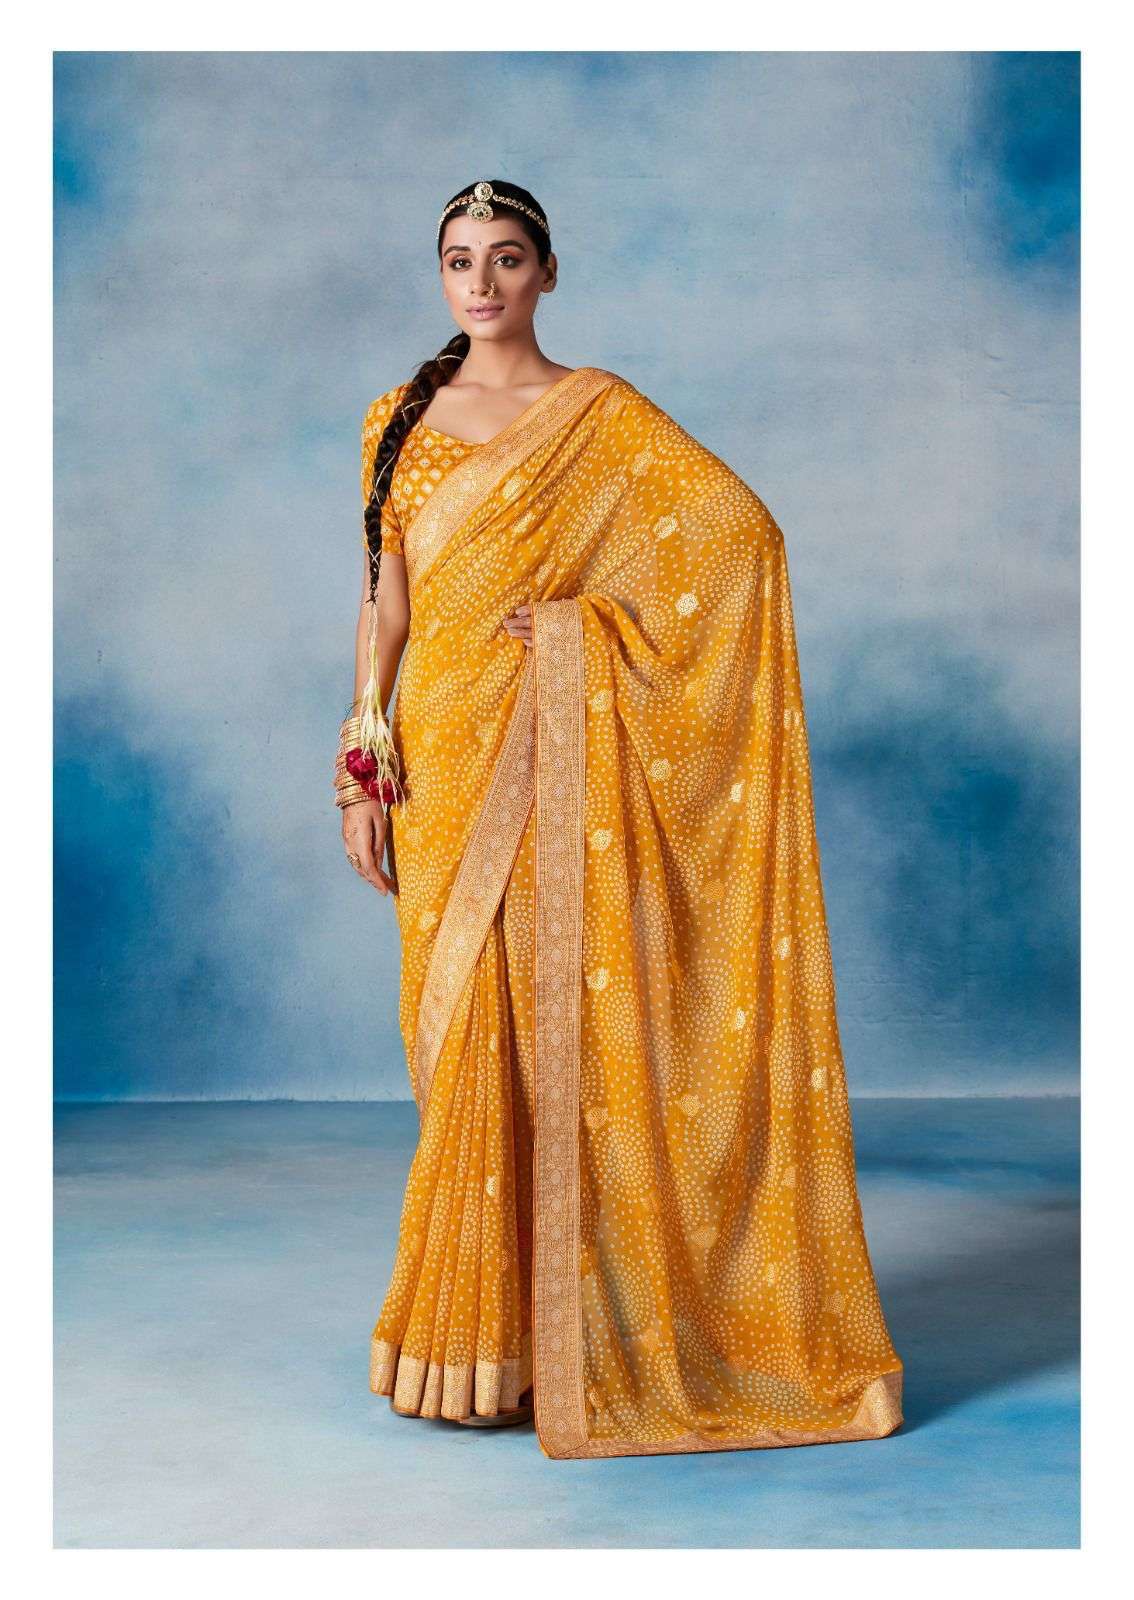 saree catlogue haldi marriage haldi collection arrival heavy weightless fabric with mill bandhej print and weaving border n foil print with running blouse blouse